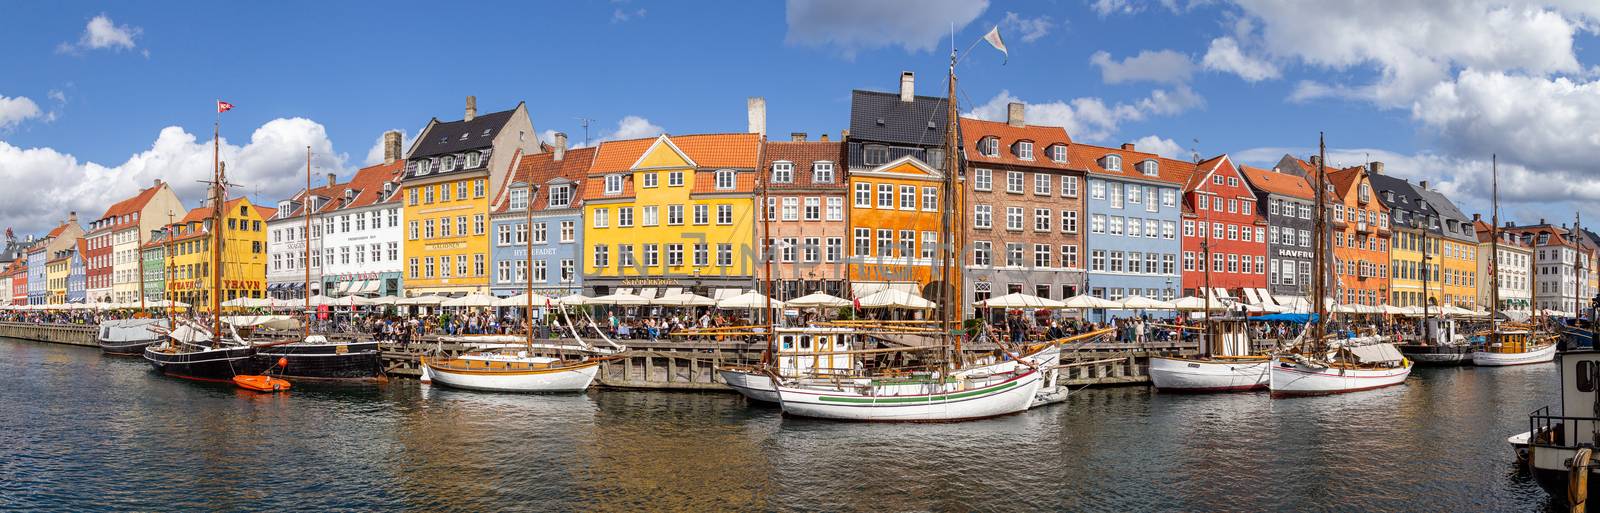 Copenhagen, Denmark - August 21, 2019: Panoramic view of the famous Nyhavn district in the city centre.